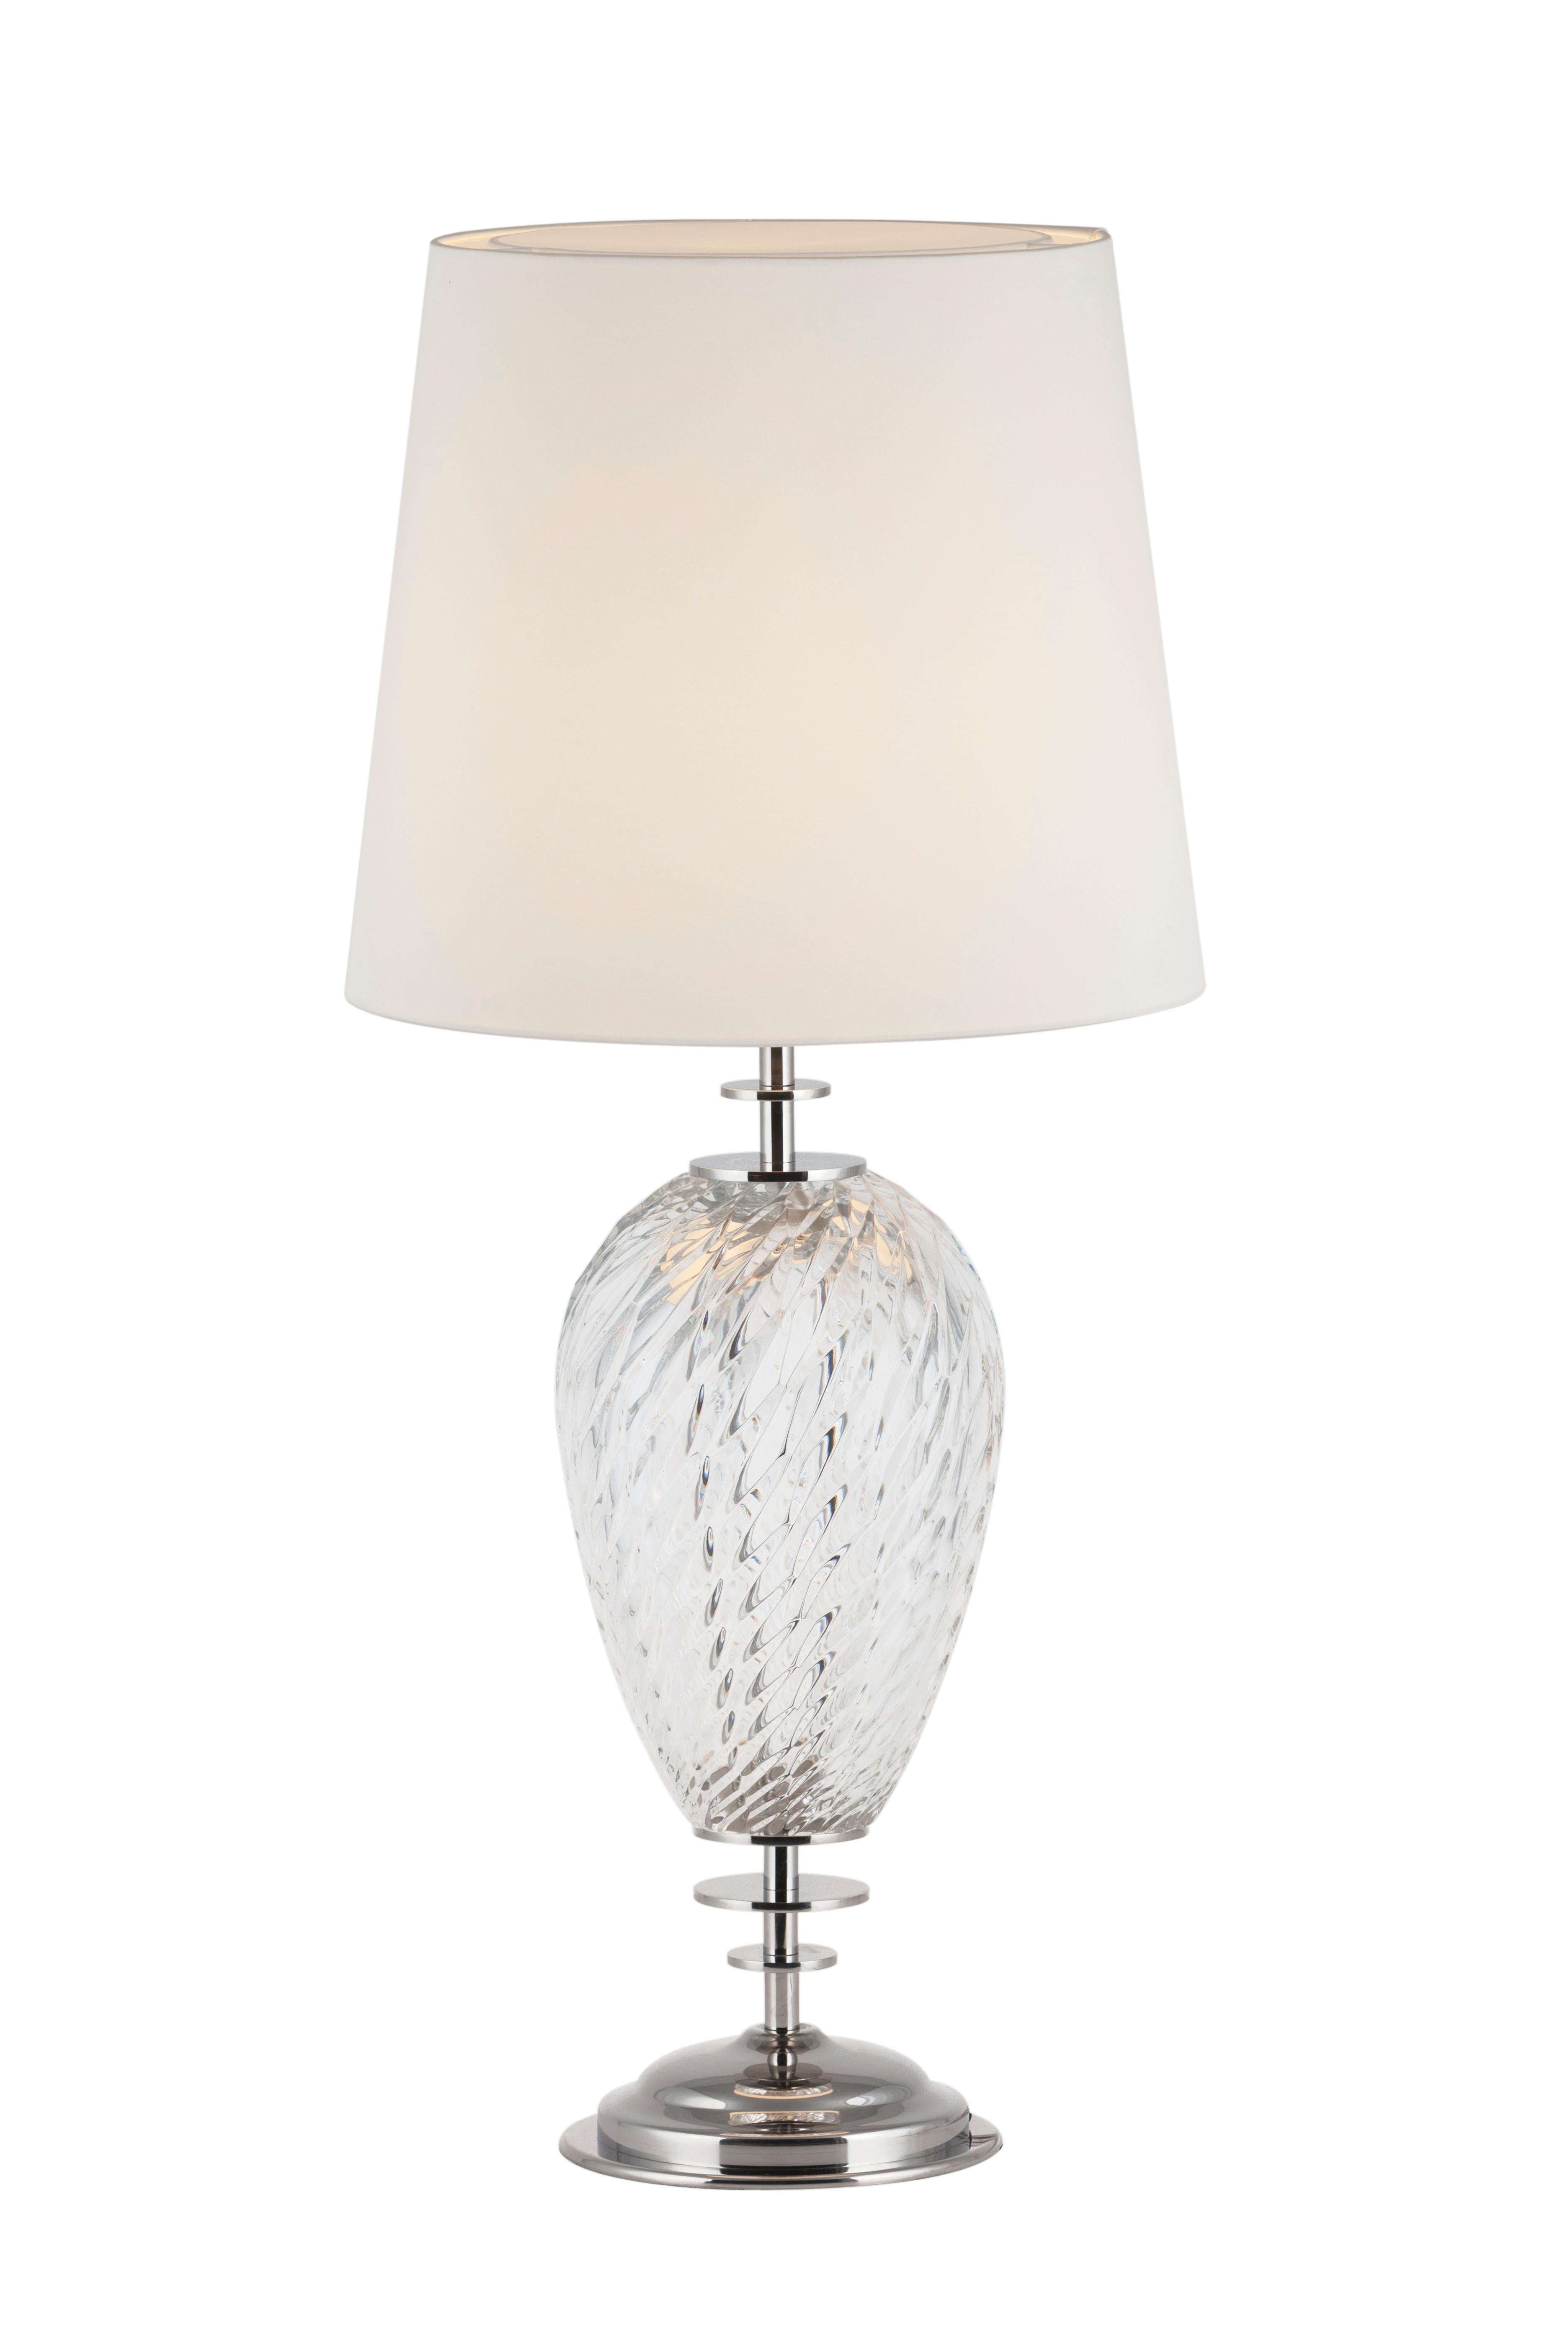 Art Deco Vista Alegre Crystal Table Lamp Handmade in Portugal by Greenapple In New Condition For Sale In Lisboa, PT